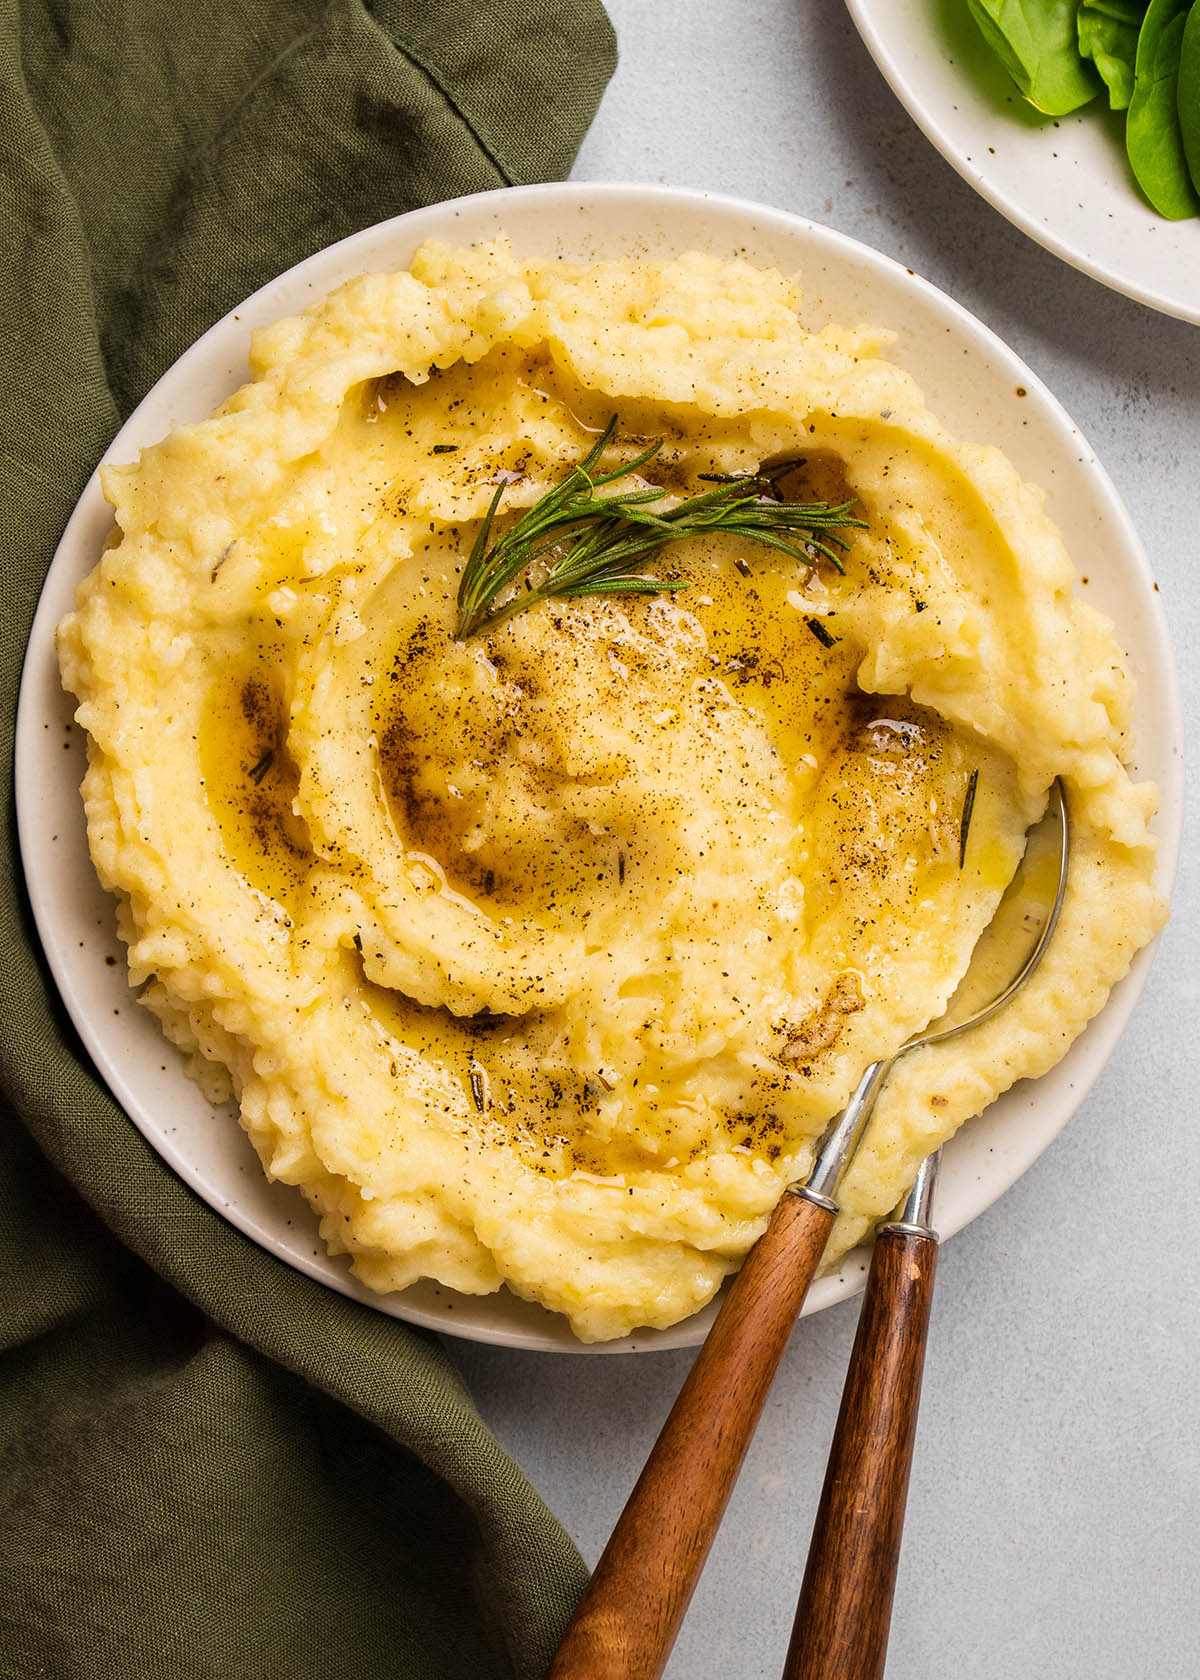 Mashed potatoes topped with browned butter and a fresh rosemary sprig.